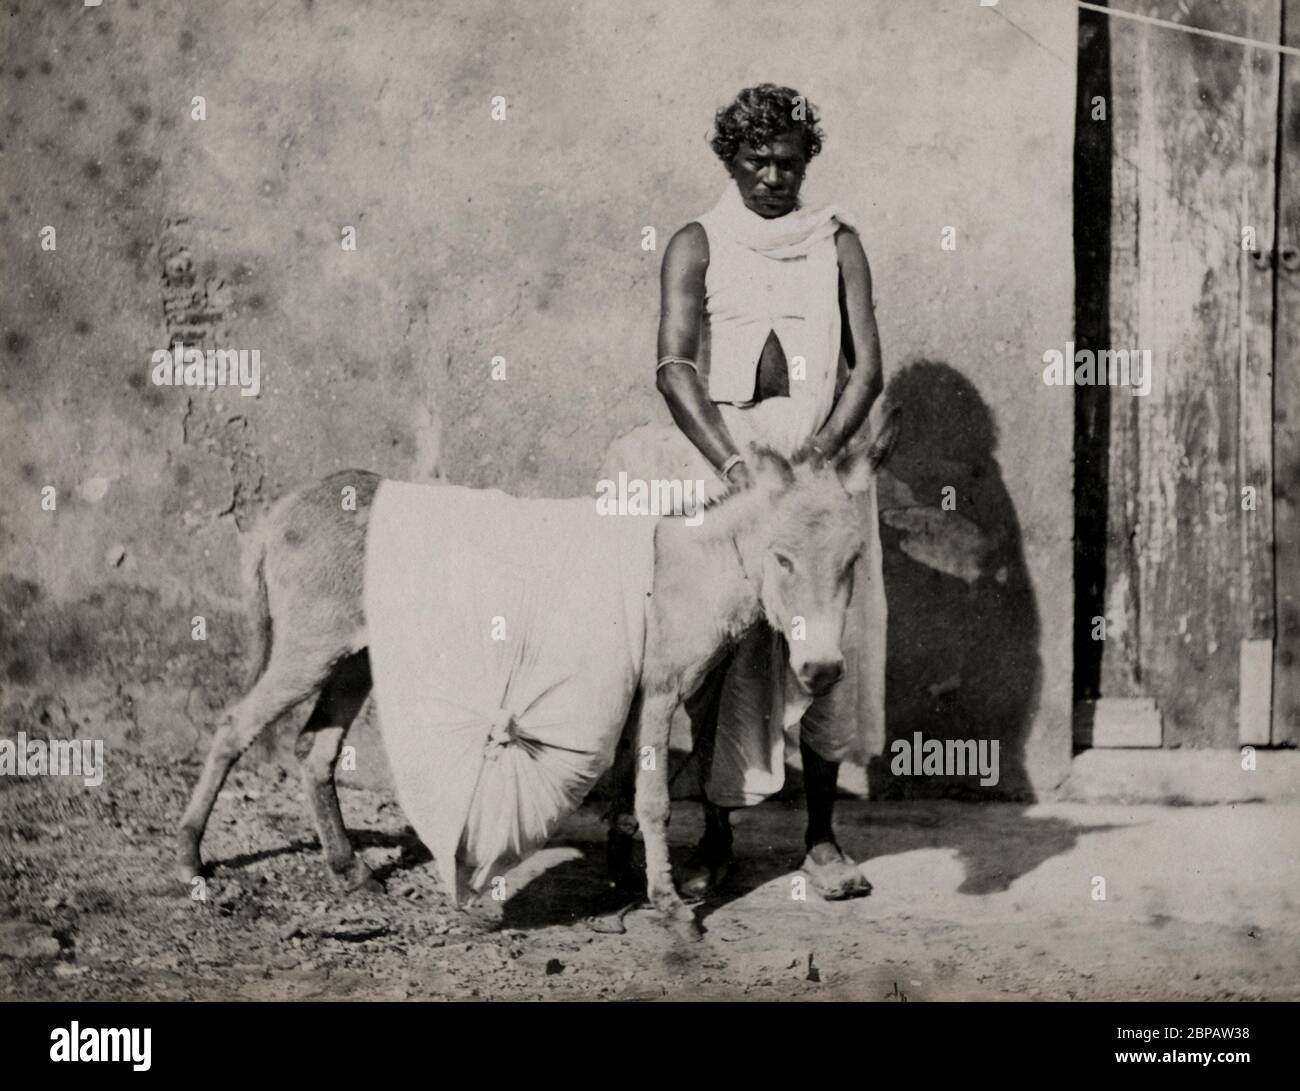 Indian man and donkey carrying a load Stock Photo